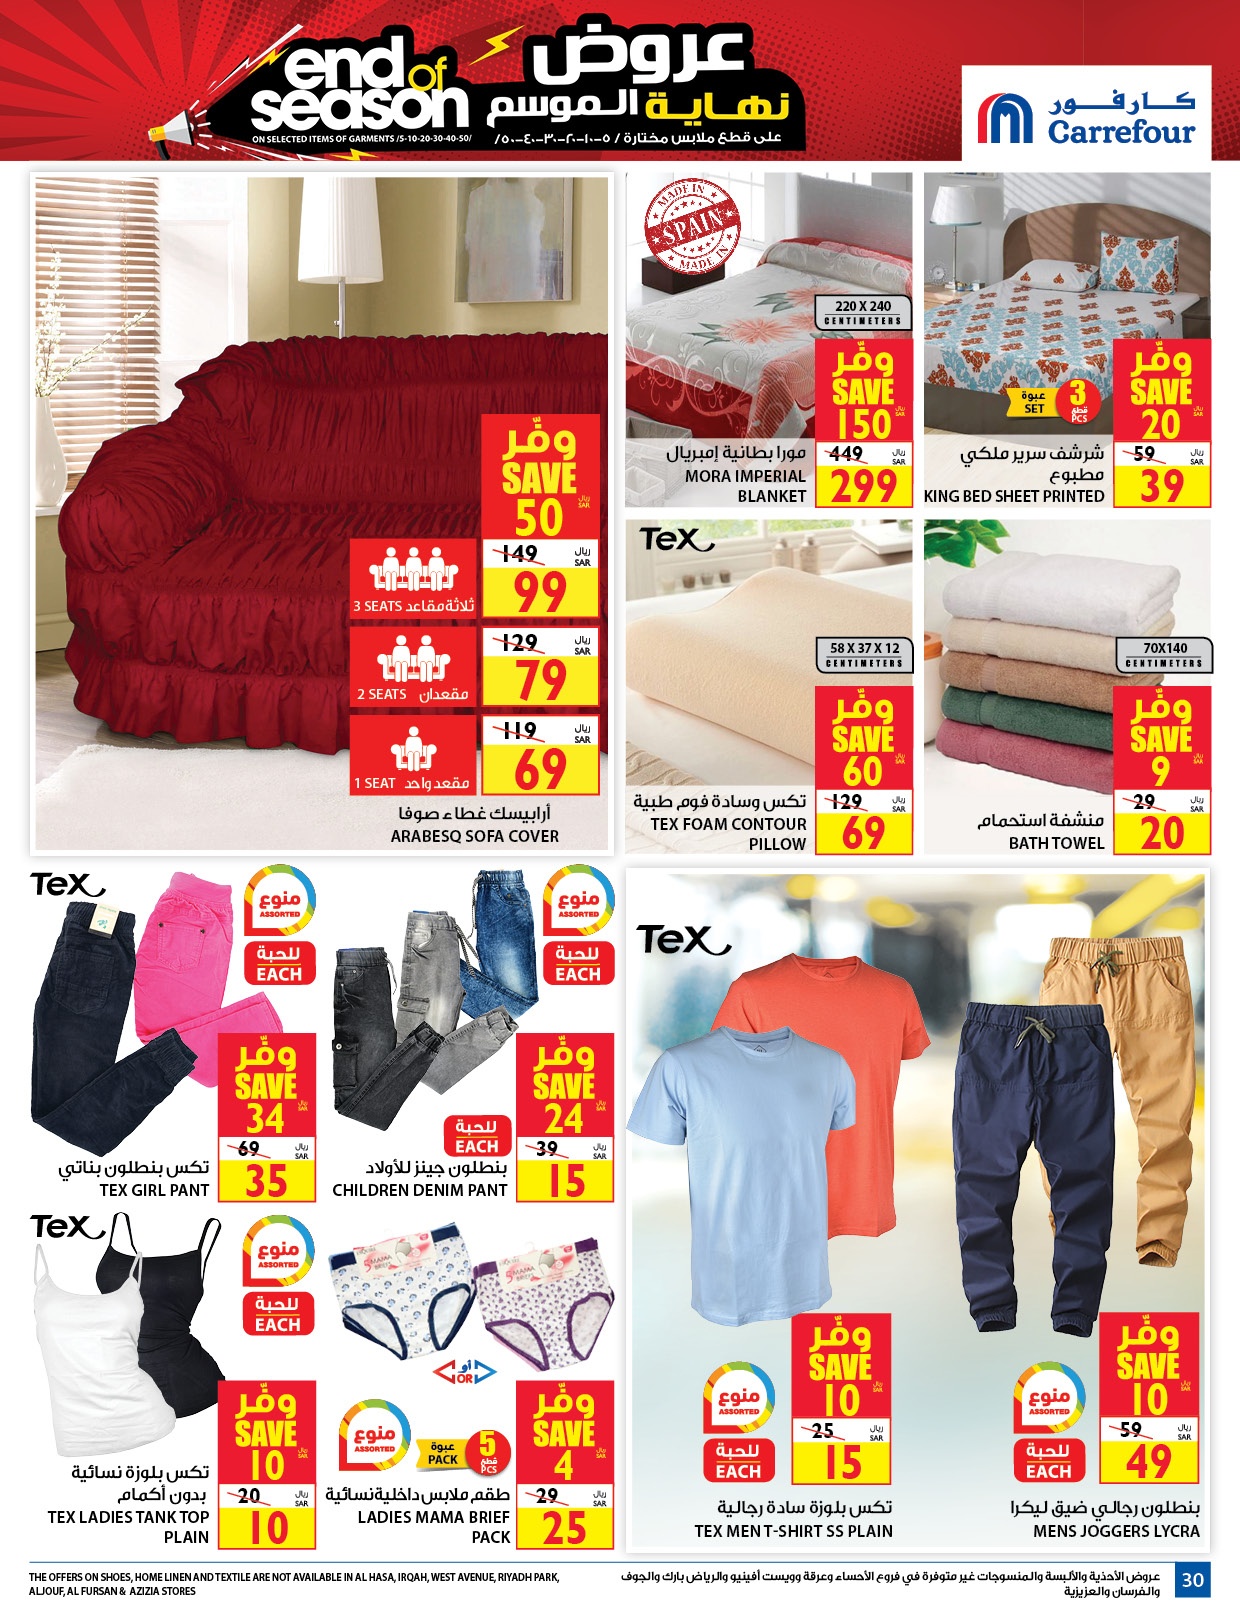 Carrefour Festival Offers from 12/8 till 25/8 | Carrefour KSA 32